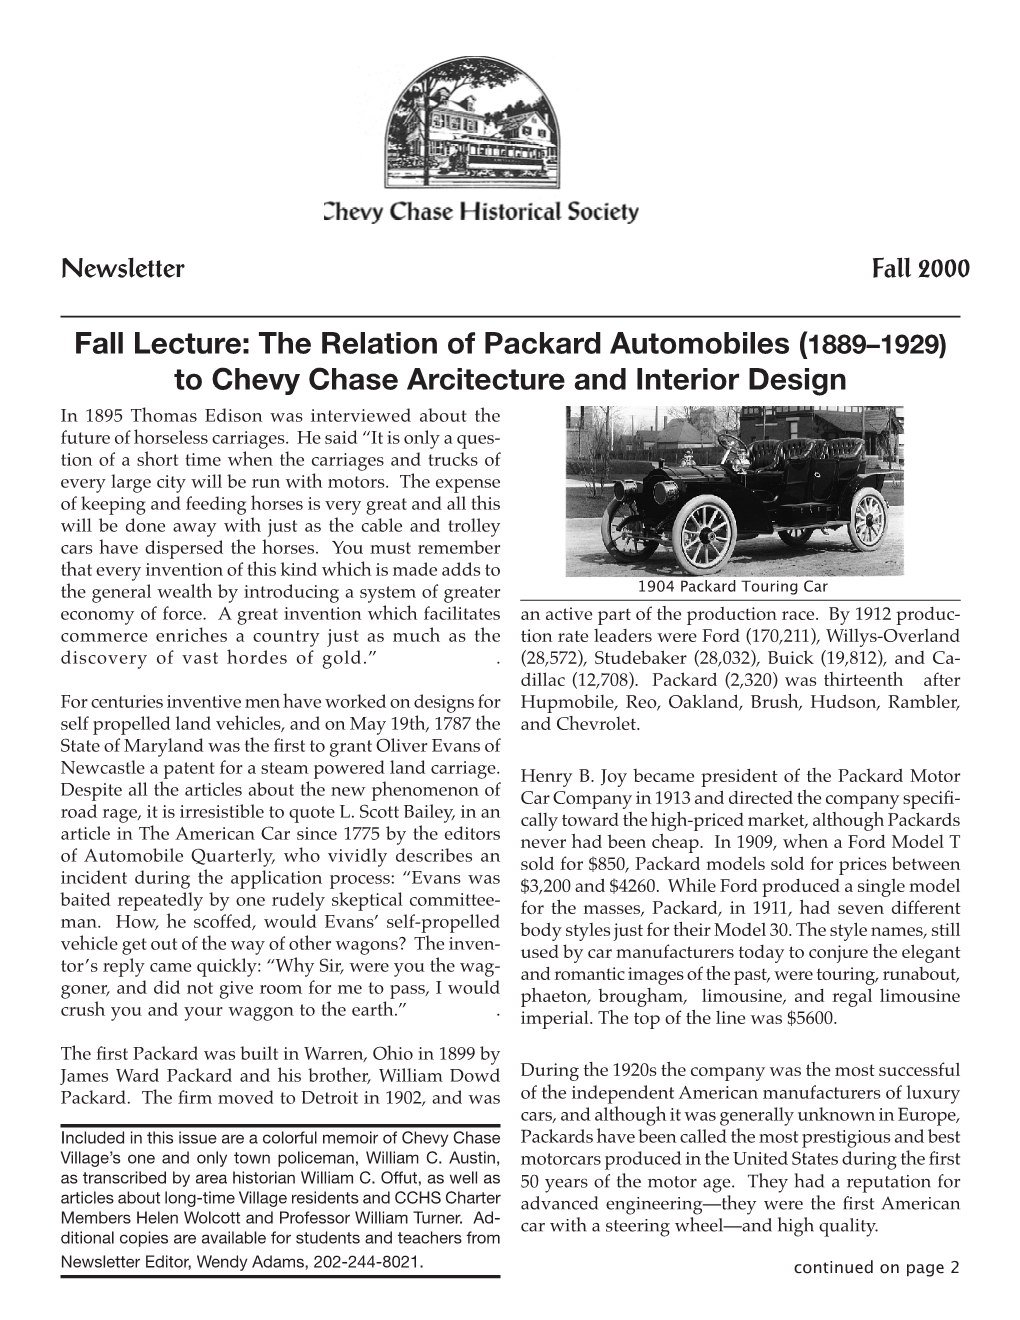 Fall Lecture: the Relation of Packard Automobiles